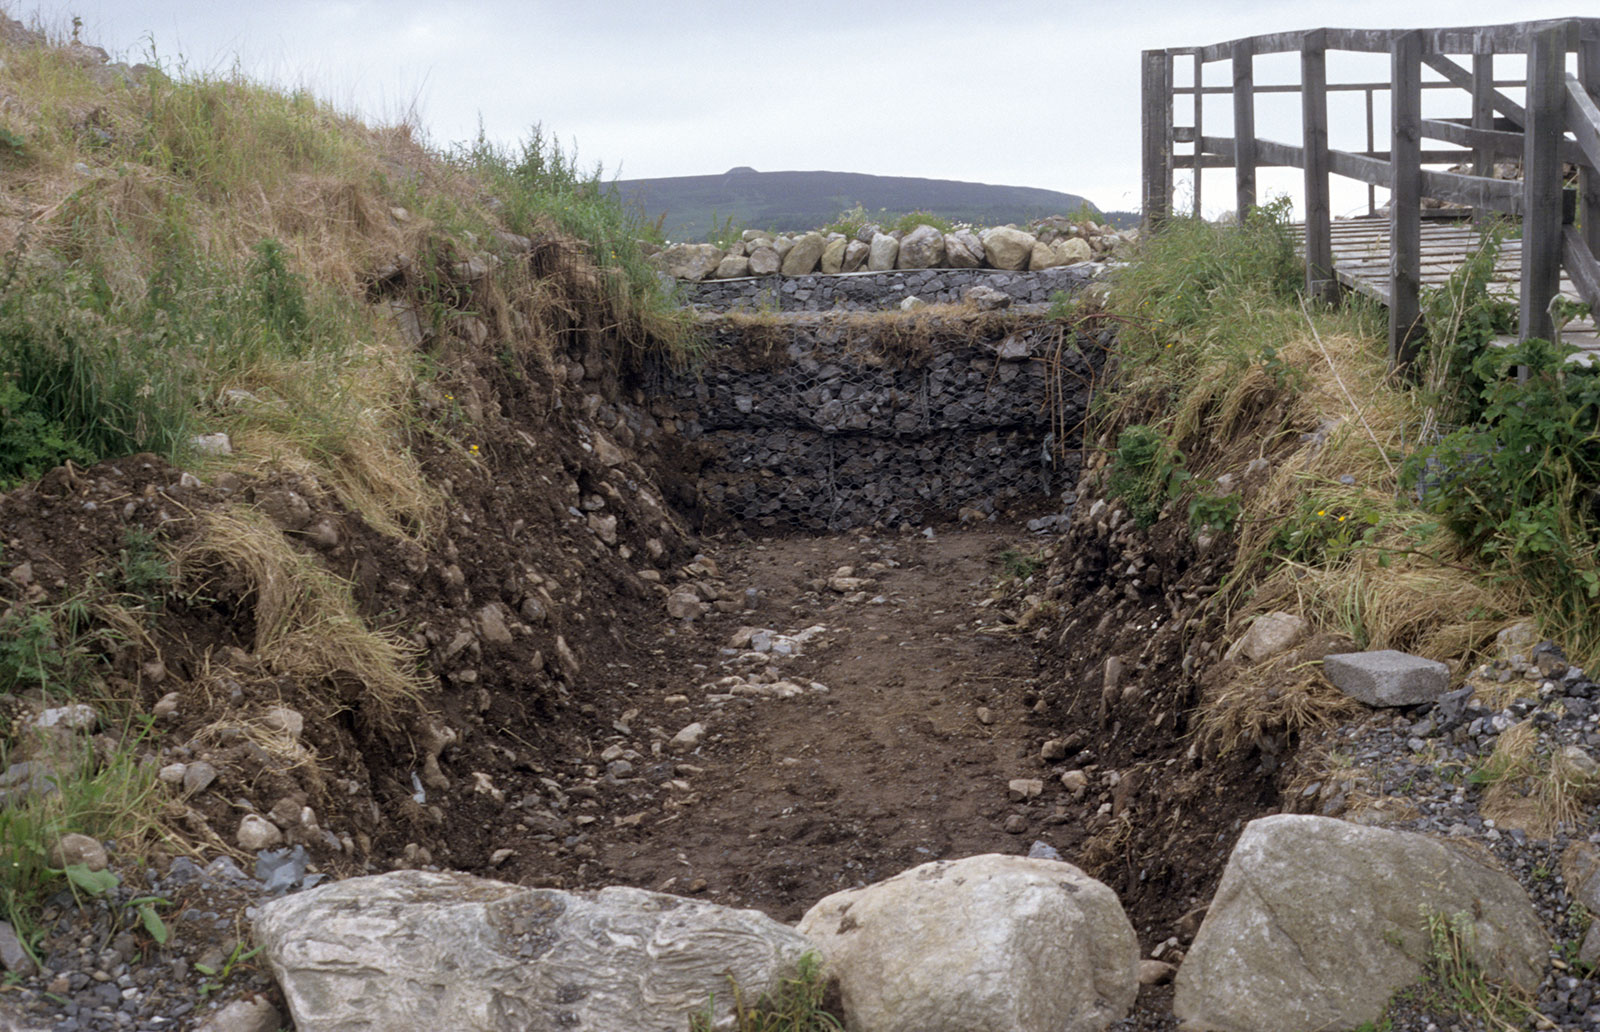 The excavation trench at Listoghil that became the passage leading into the monument.